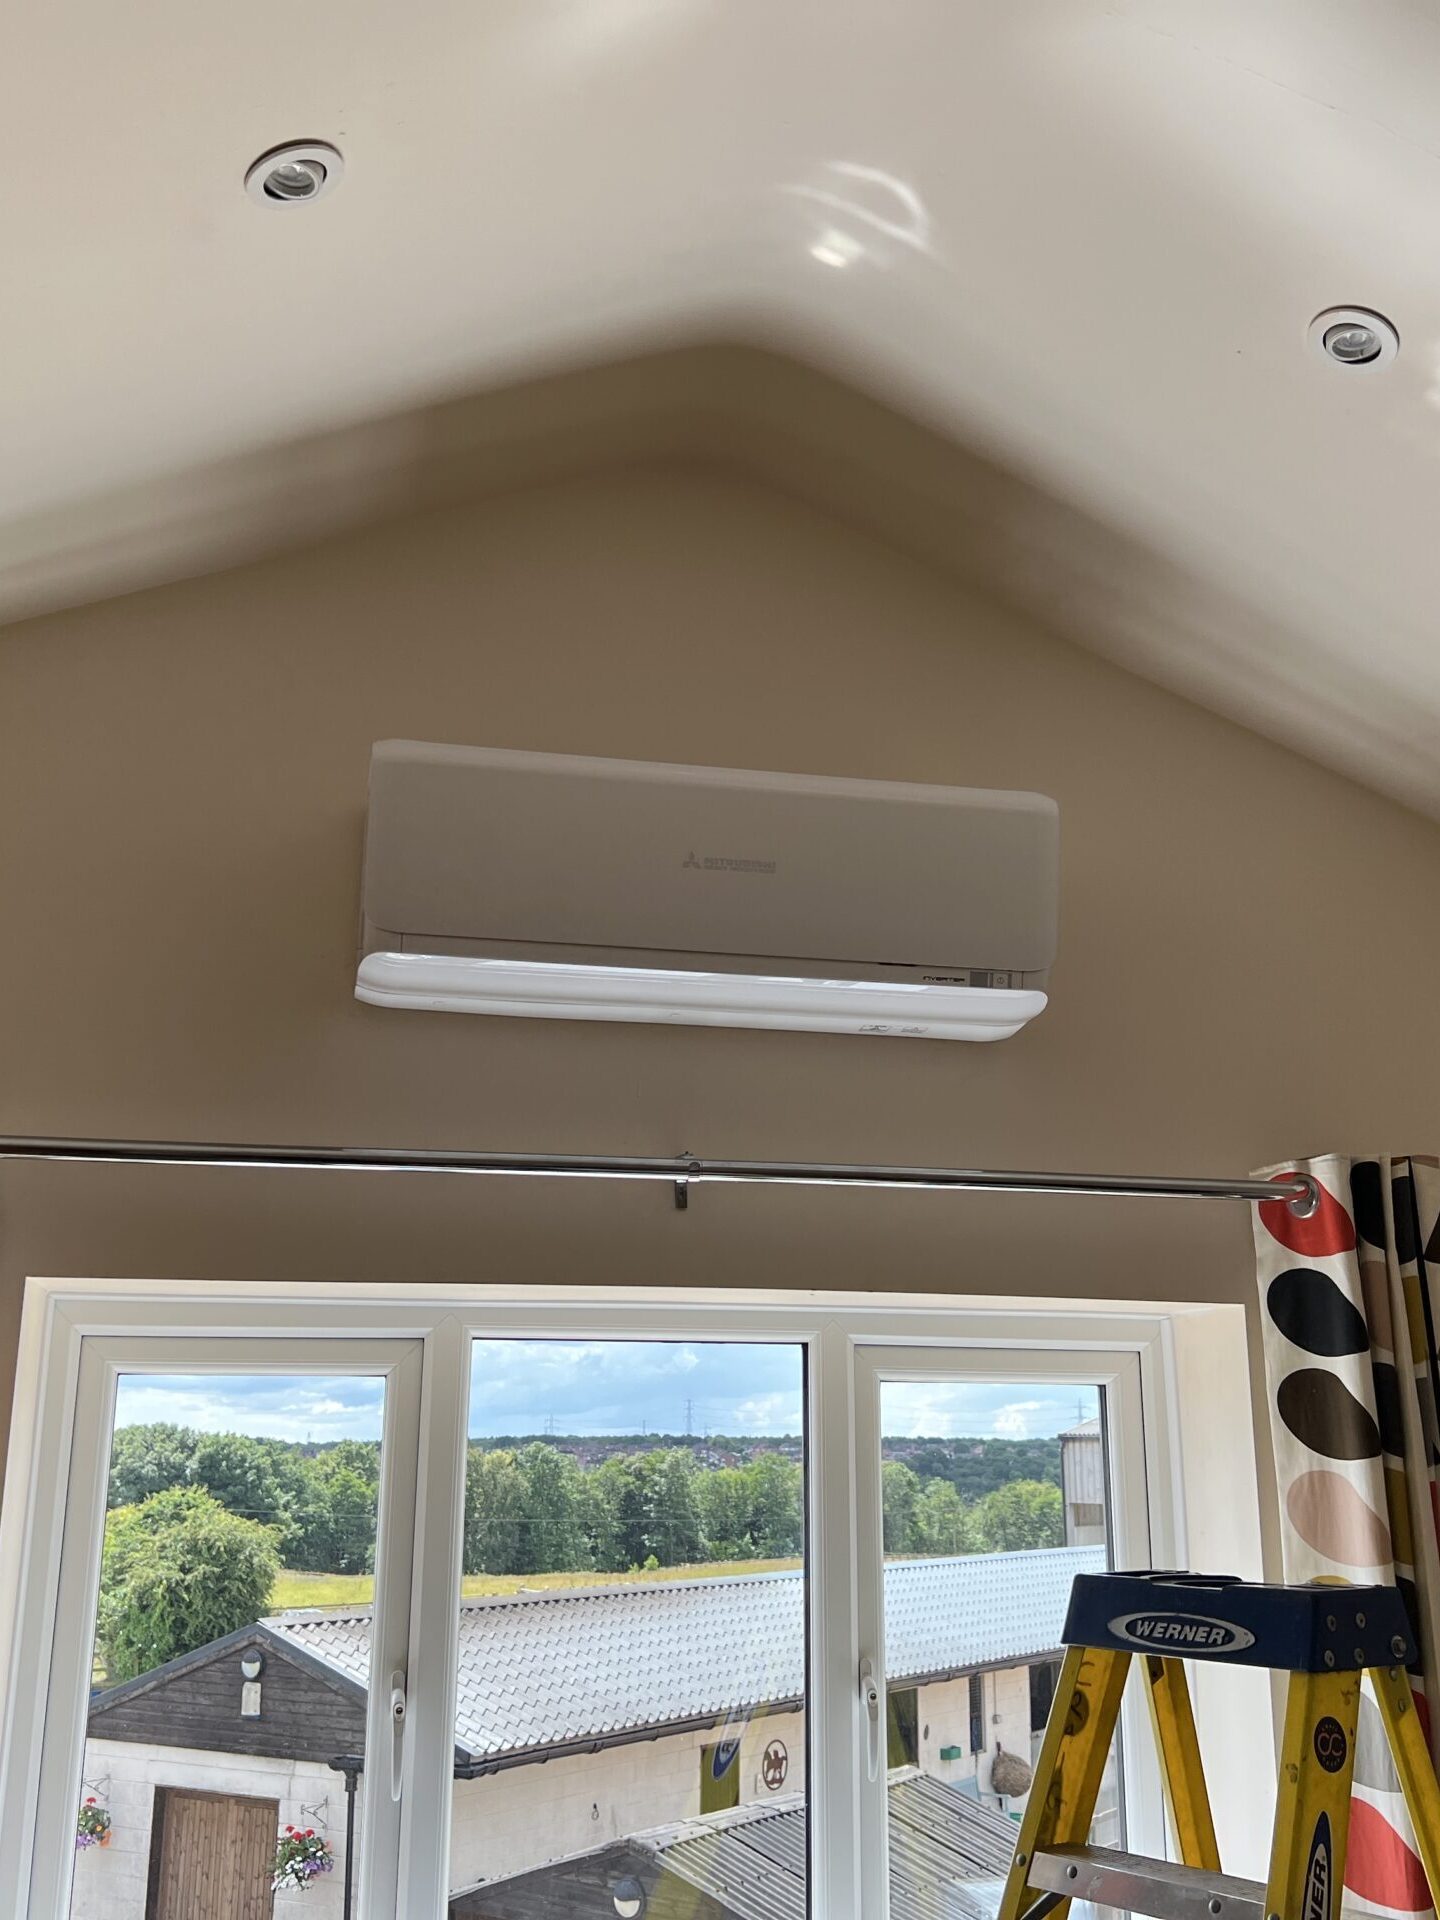 Commercial Airconditioning unit in a ceiling